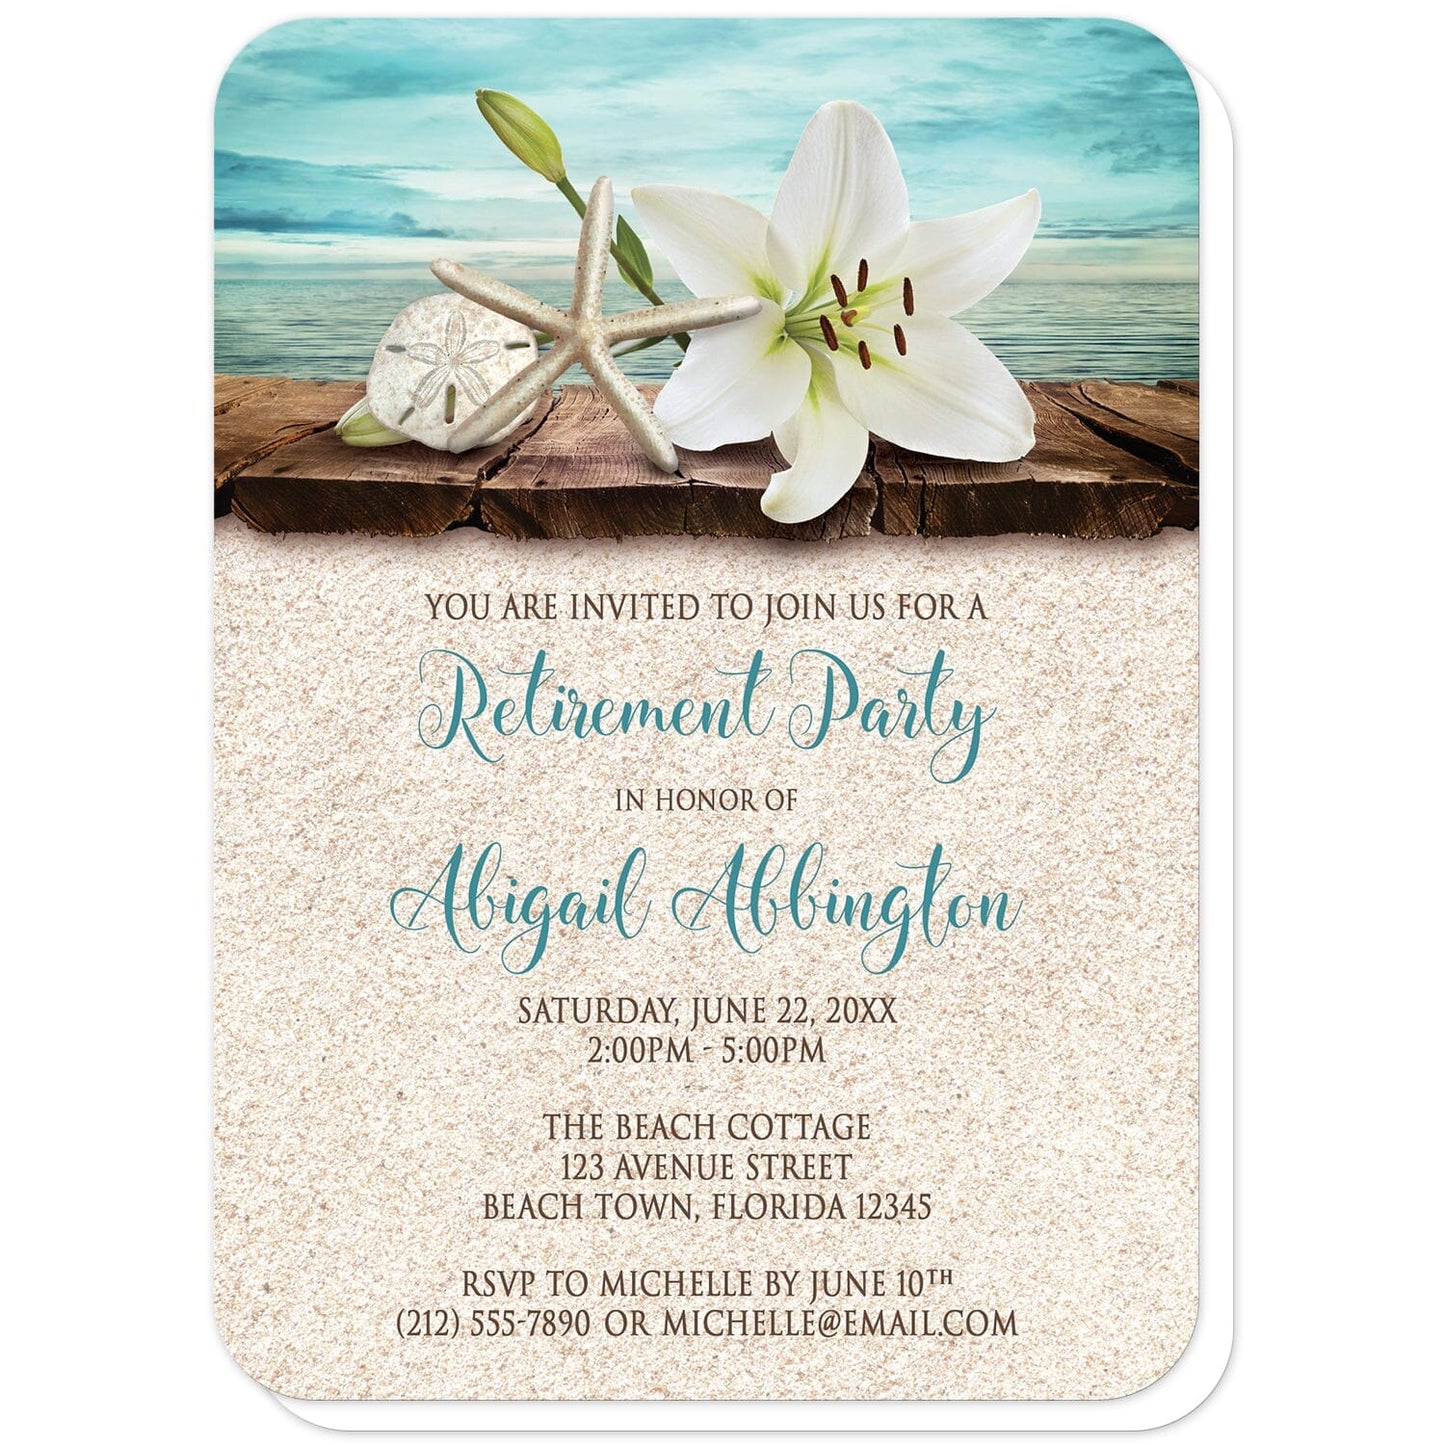 Lily Seashells and Sand Beach Retirement Invitations (with rounded corners) at Artistically Invited. Floral tropical invites with an elegant white lily, a starfish, and a sand dollar on a rustic wood dock overlooking the open water. These tropical lily invitations are fully illustrated in a beach color scheme of teal and turquoise, beige, and brown. Your personalized retirement party details are custom printed in dark brown and teal over a beige sand texture background design.